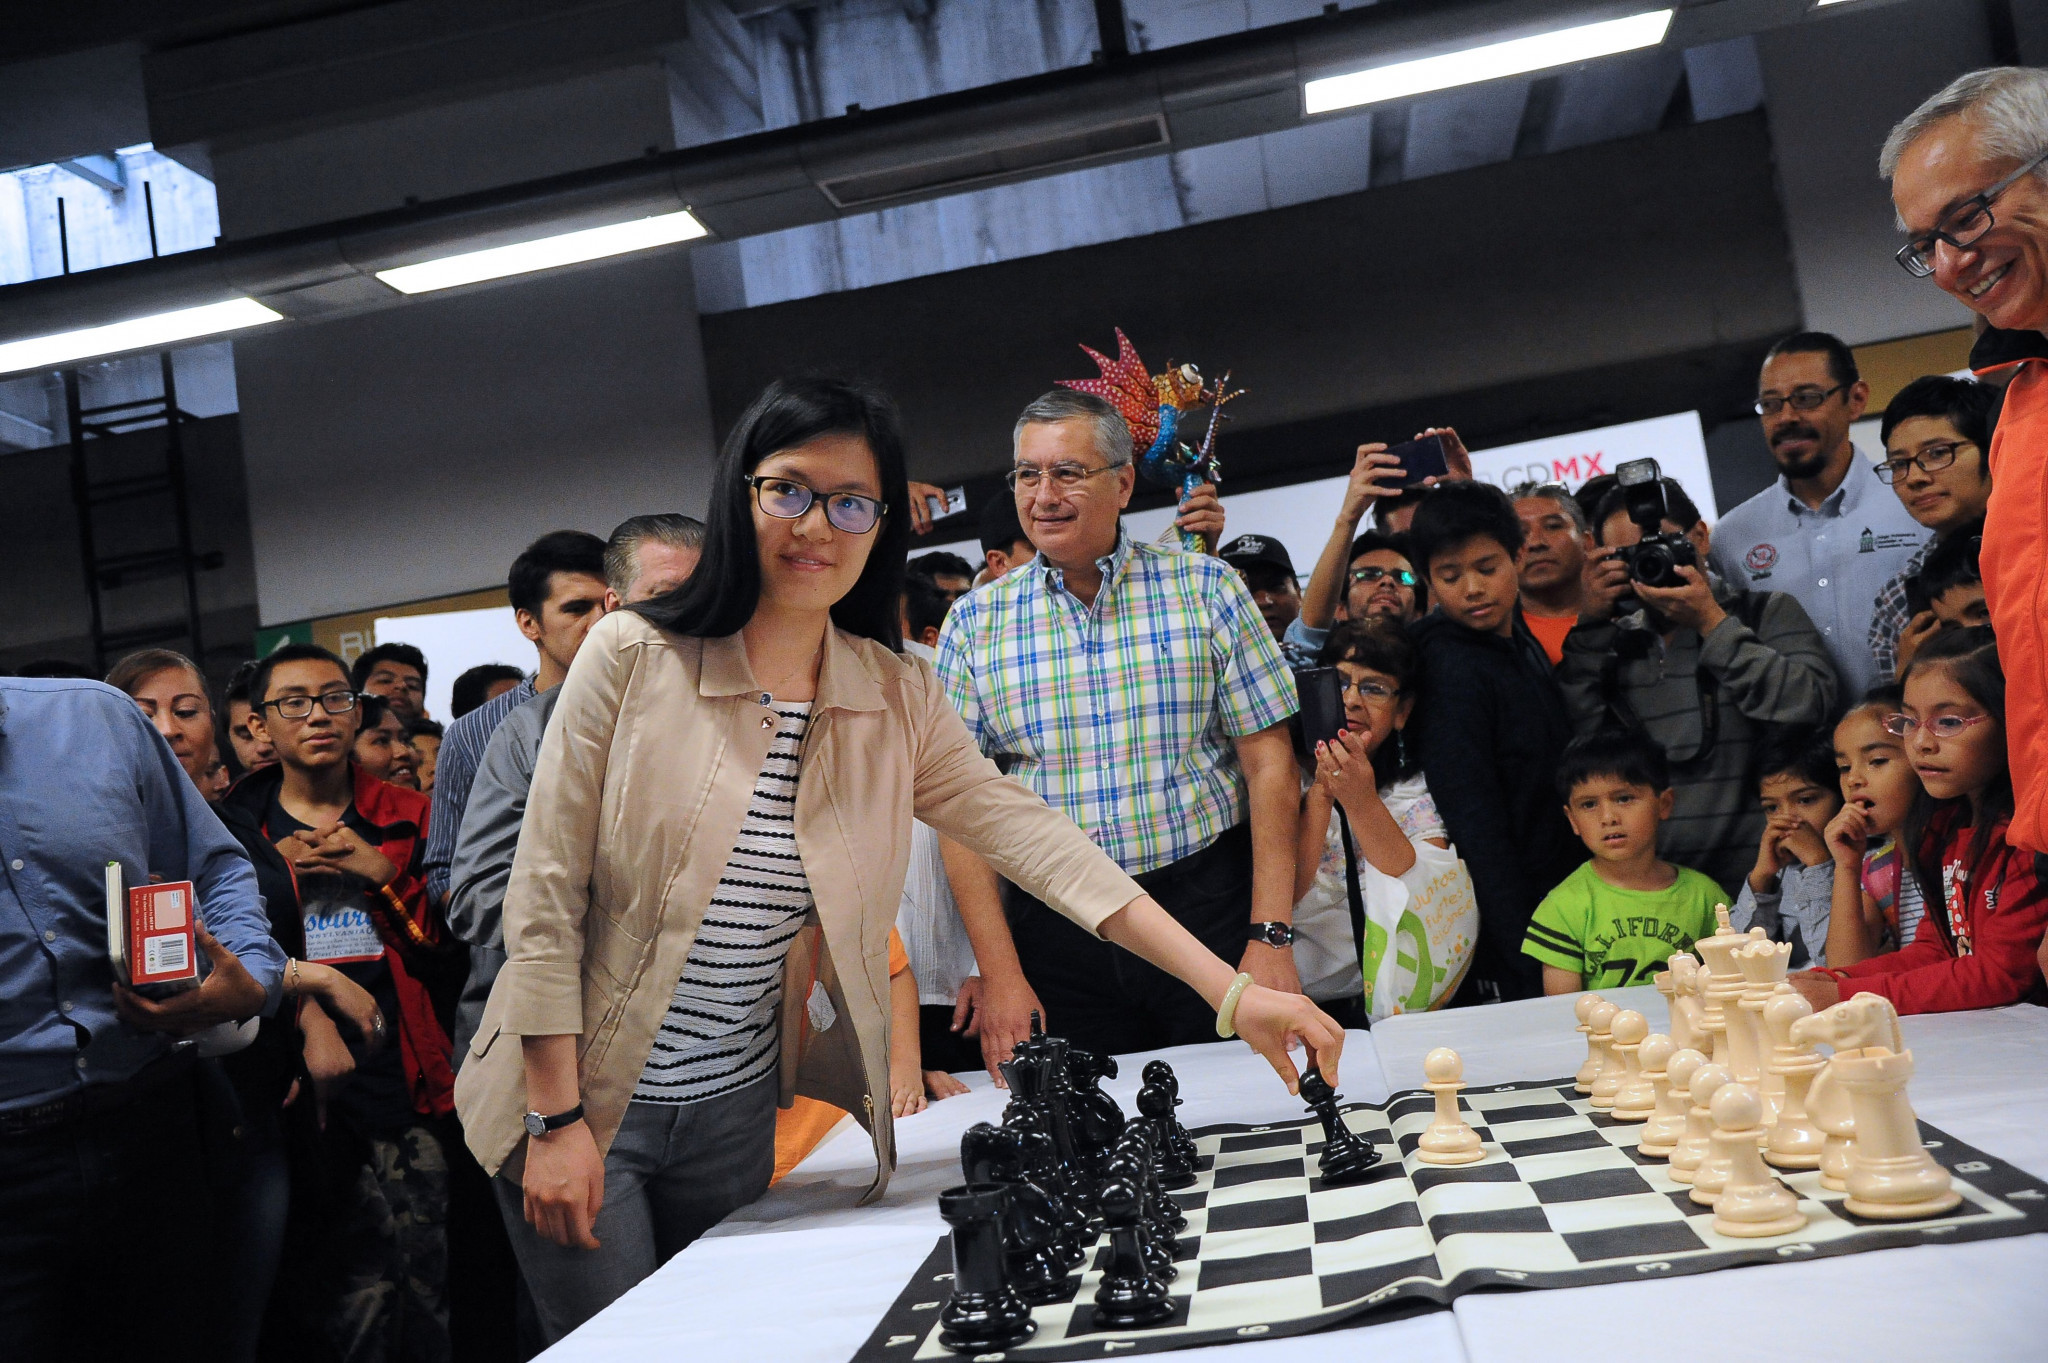 Four-times women's world chess champion Hou Yifan will defend her Asian Games title at Hangzhou 2022 - after a 13-year absence ©Getty Images